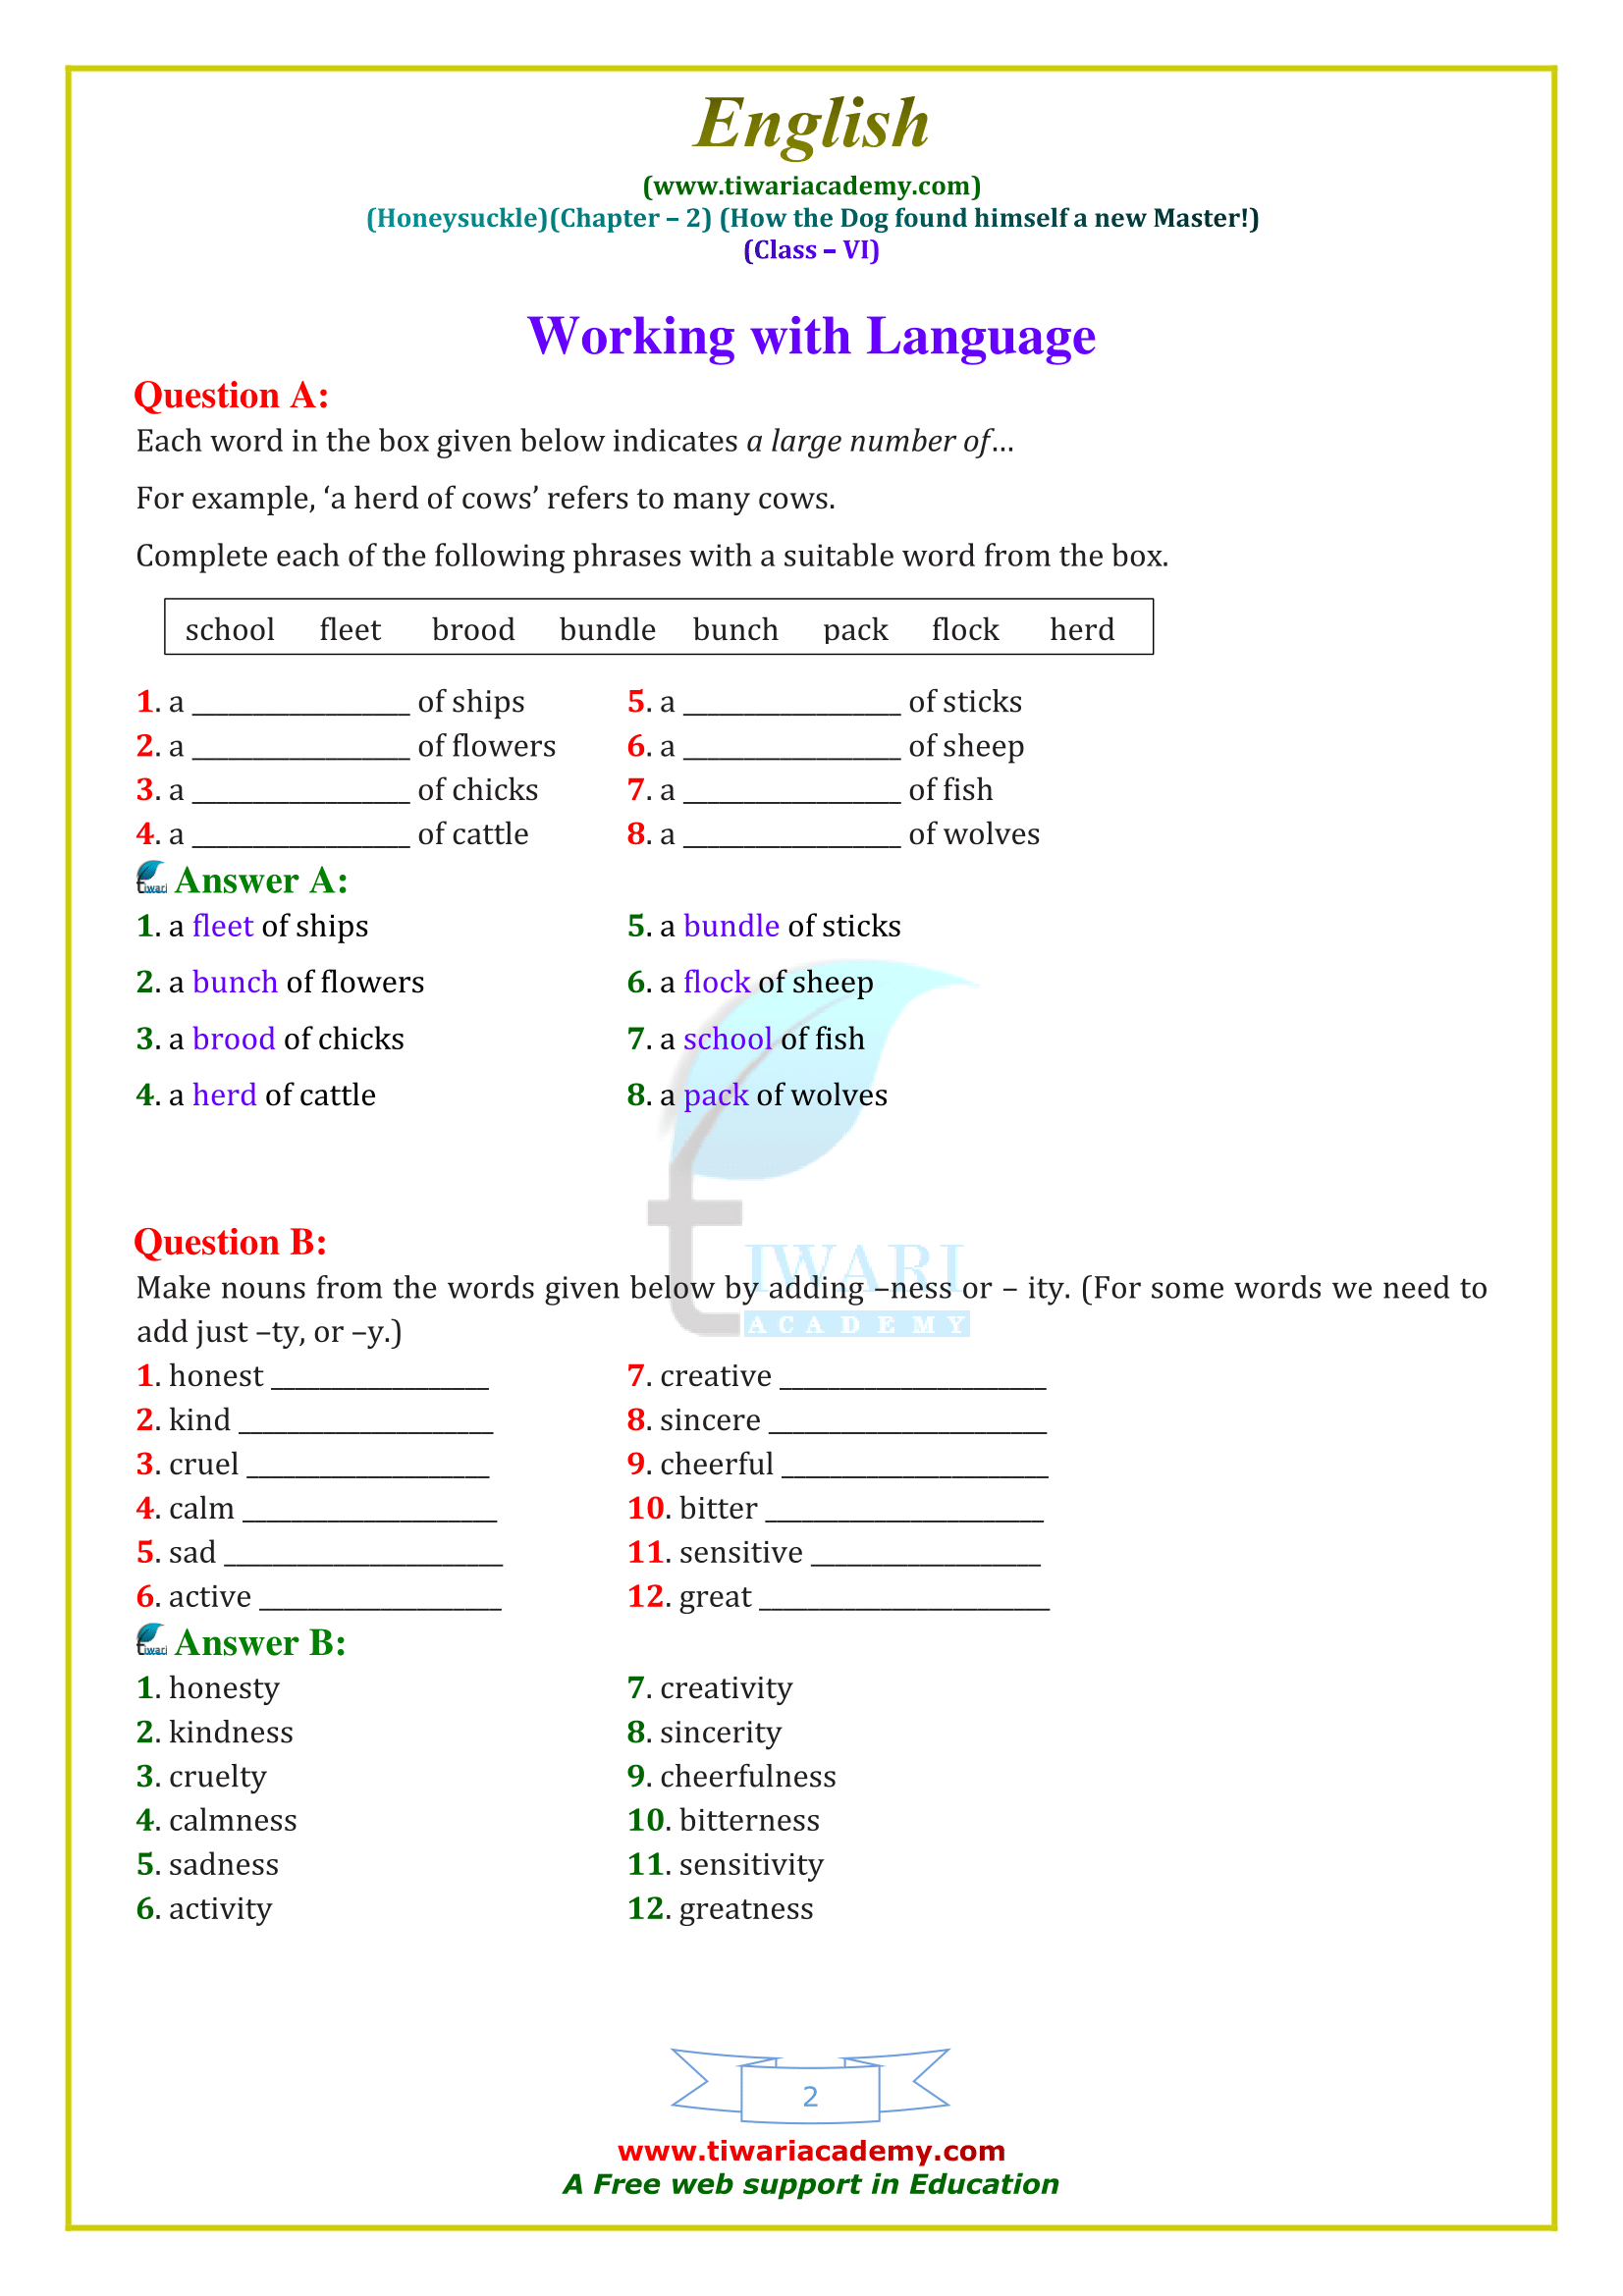 NCERT Solutions for Class 6 English Honeysuckle Chapter 2 in PDF